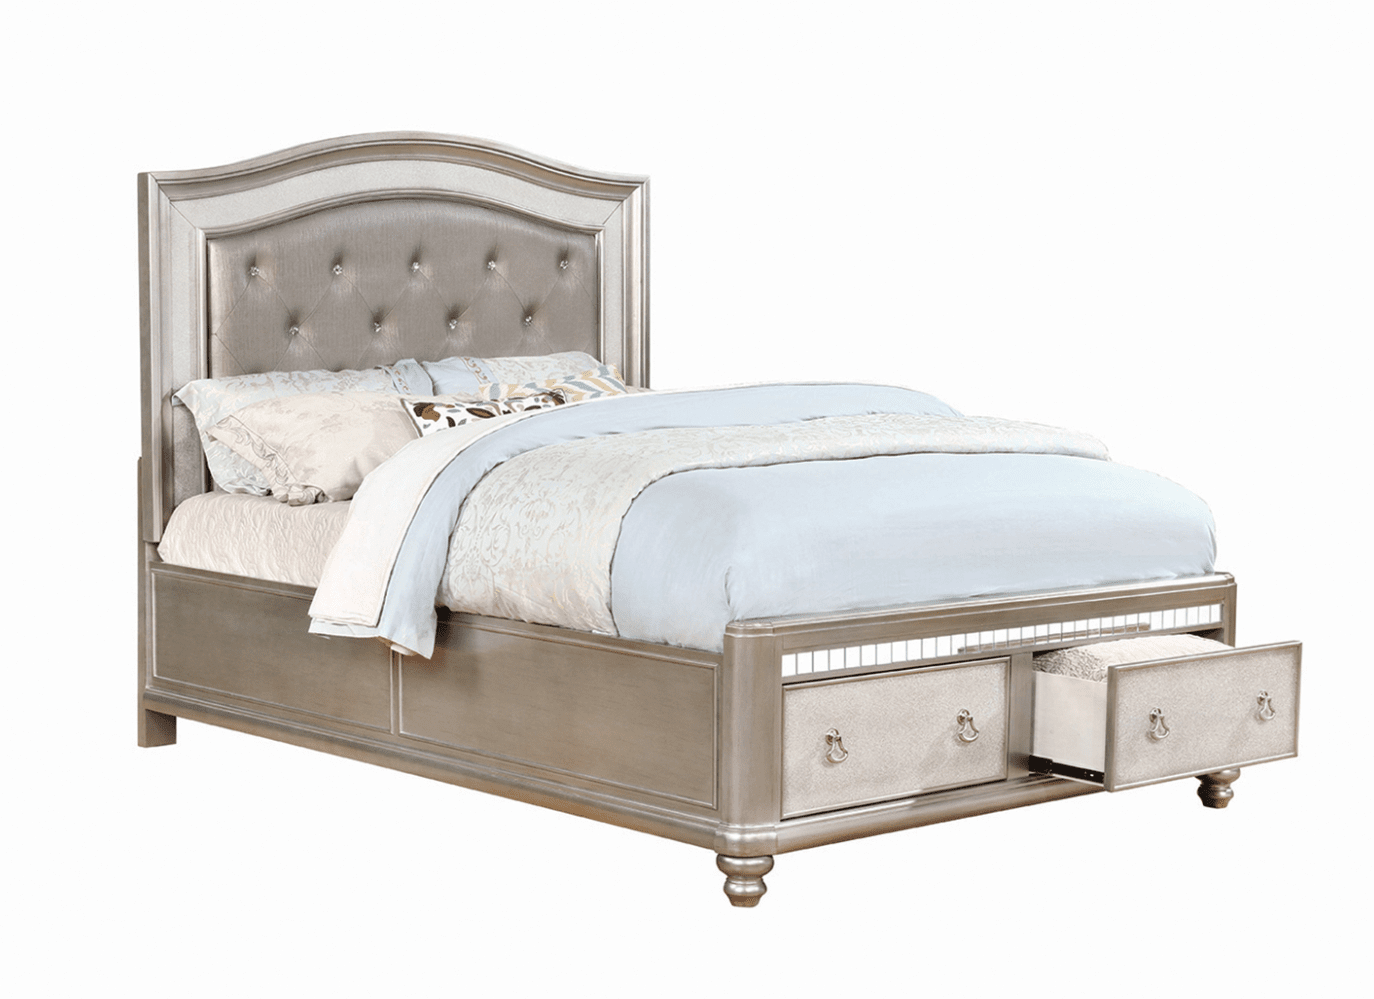 Daliah Glam Style Camel Back Queen Storage Bed